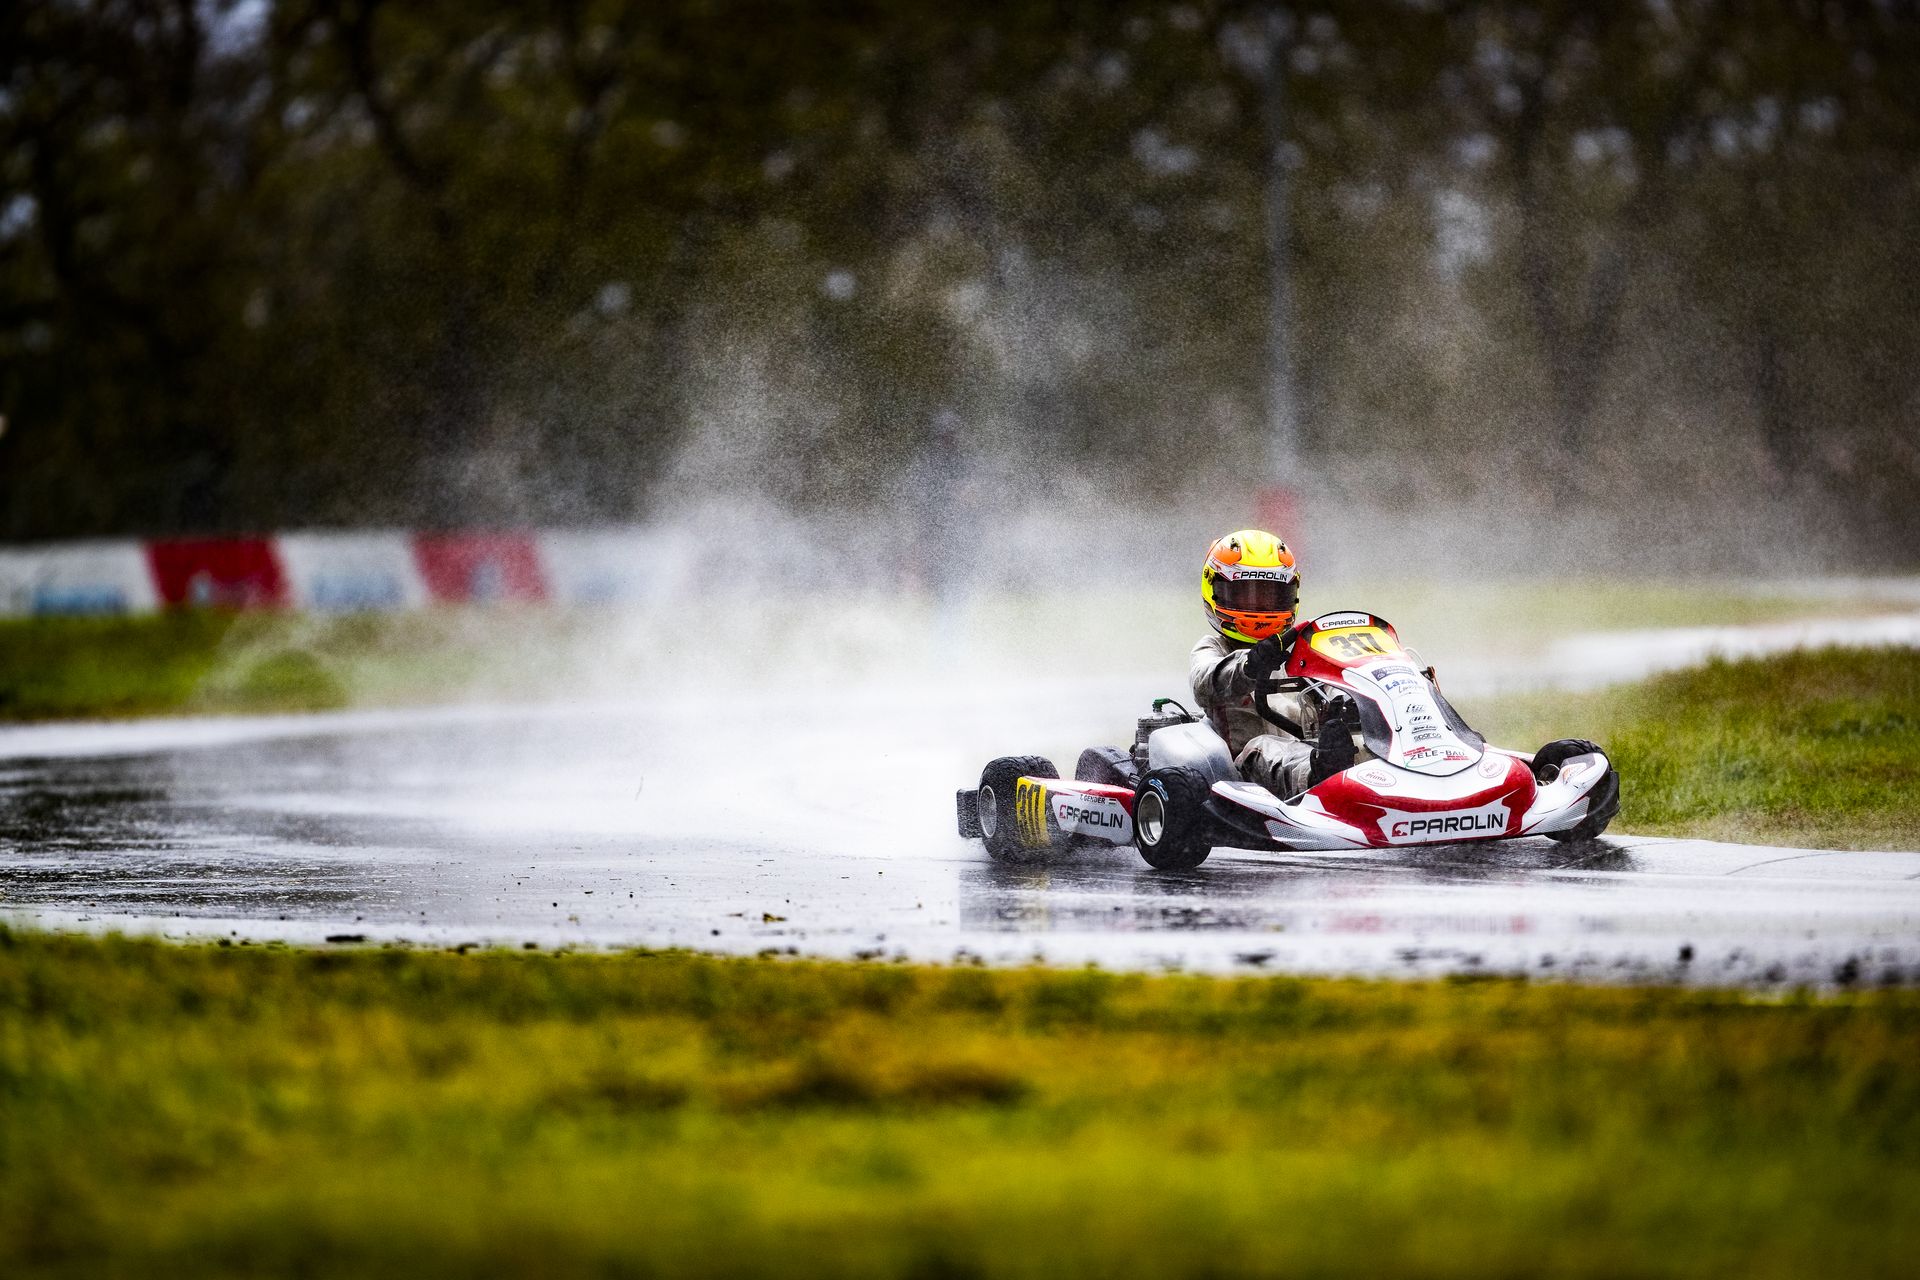 Tamas Gender Junior competes in the wet race